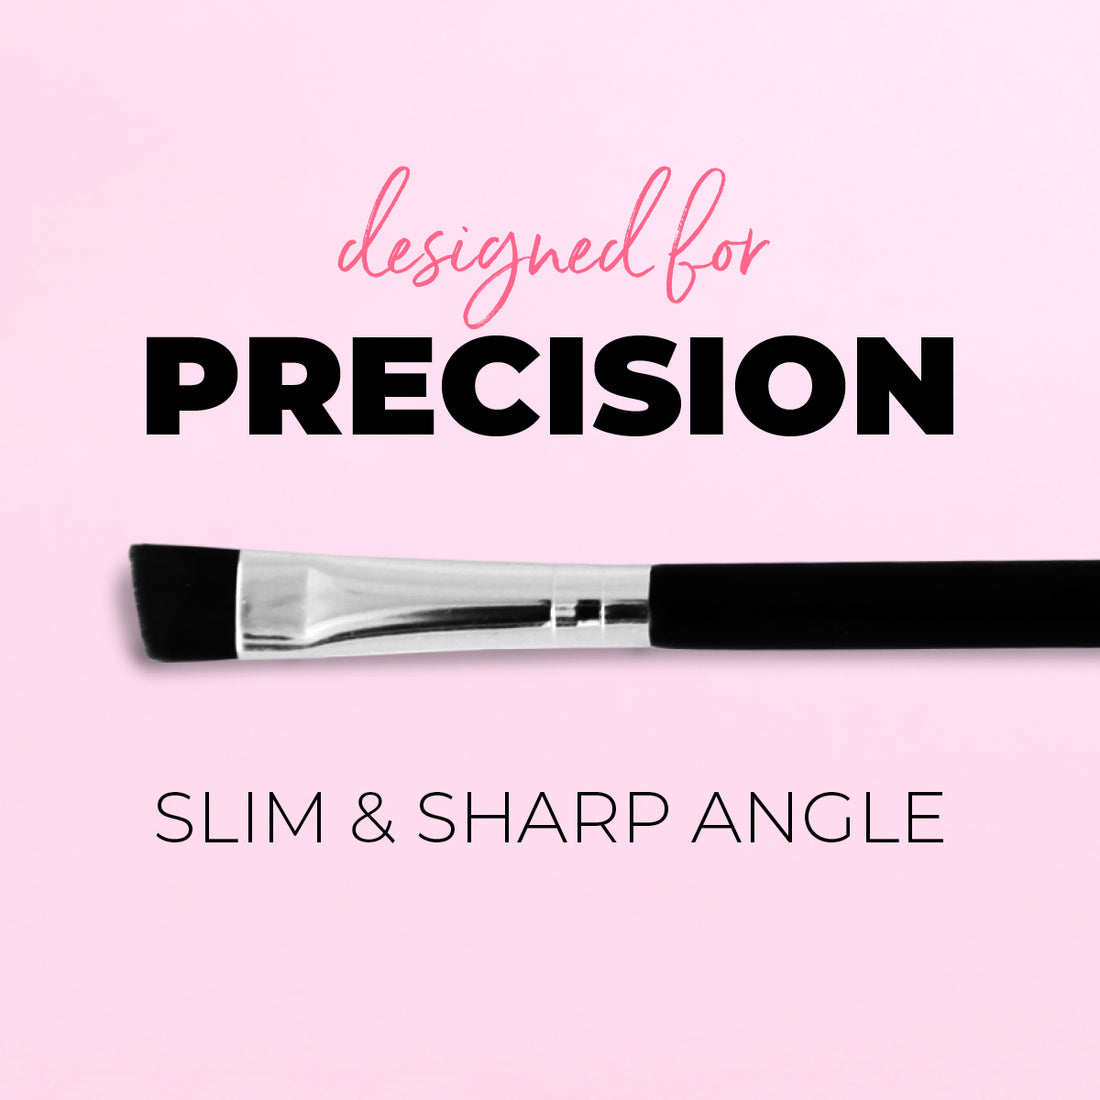 PRECISION EYEBROW BRUSH DUAL ENDED